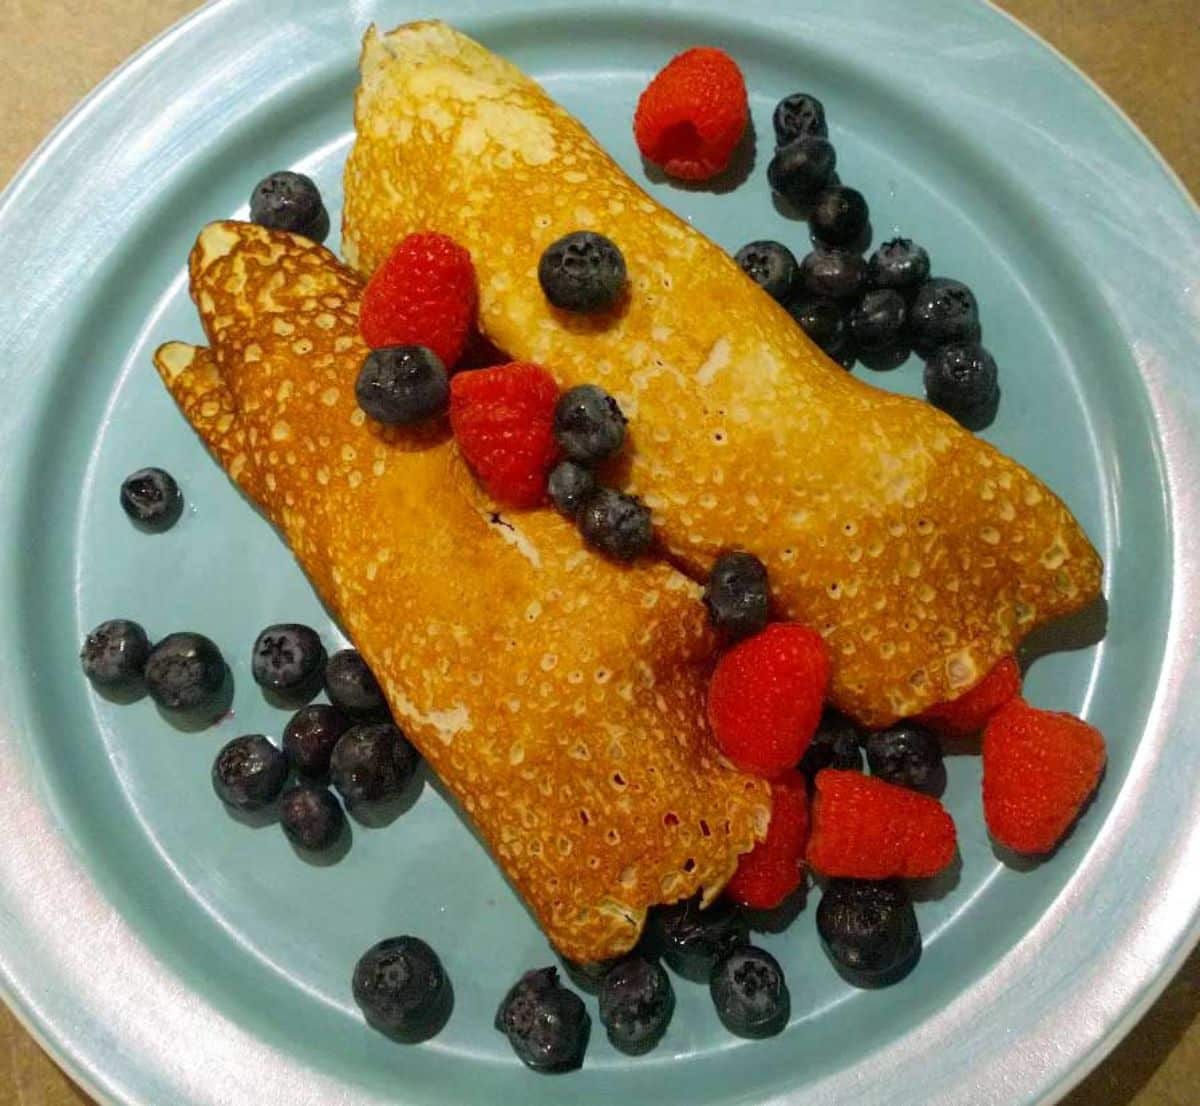 Crepe with ripe fruits on a blue plate.